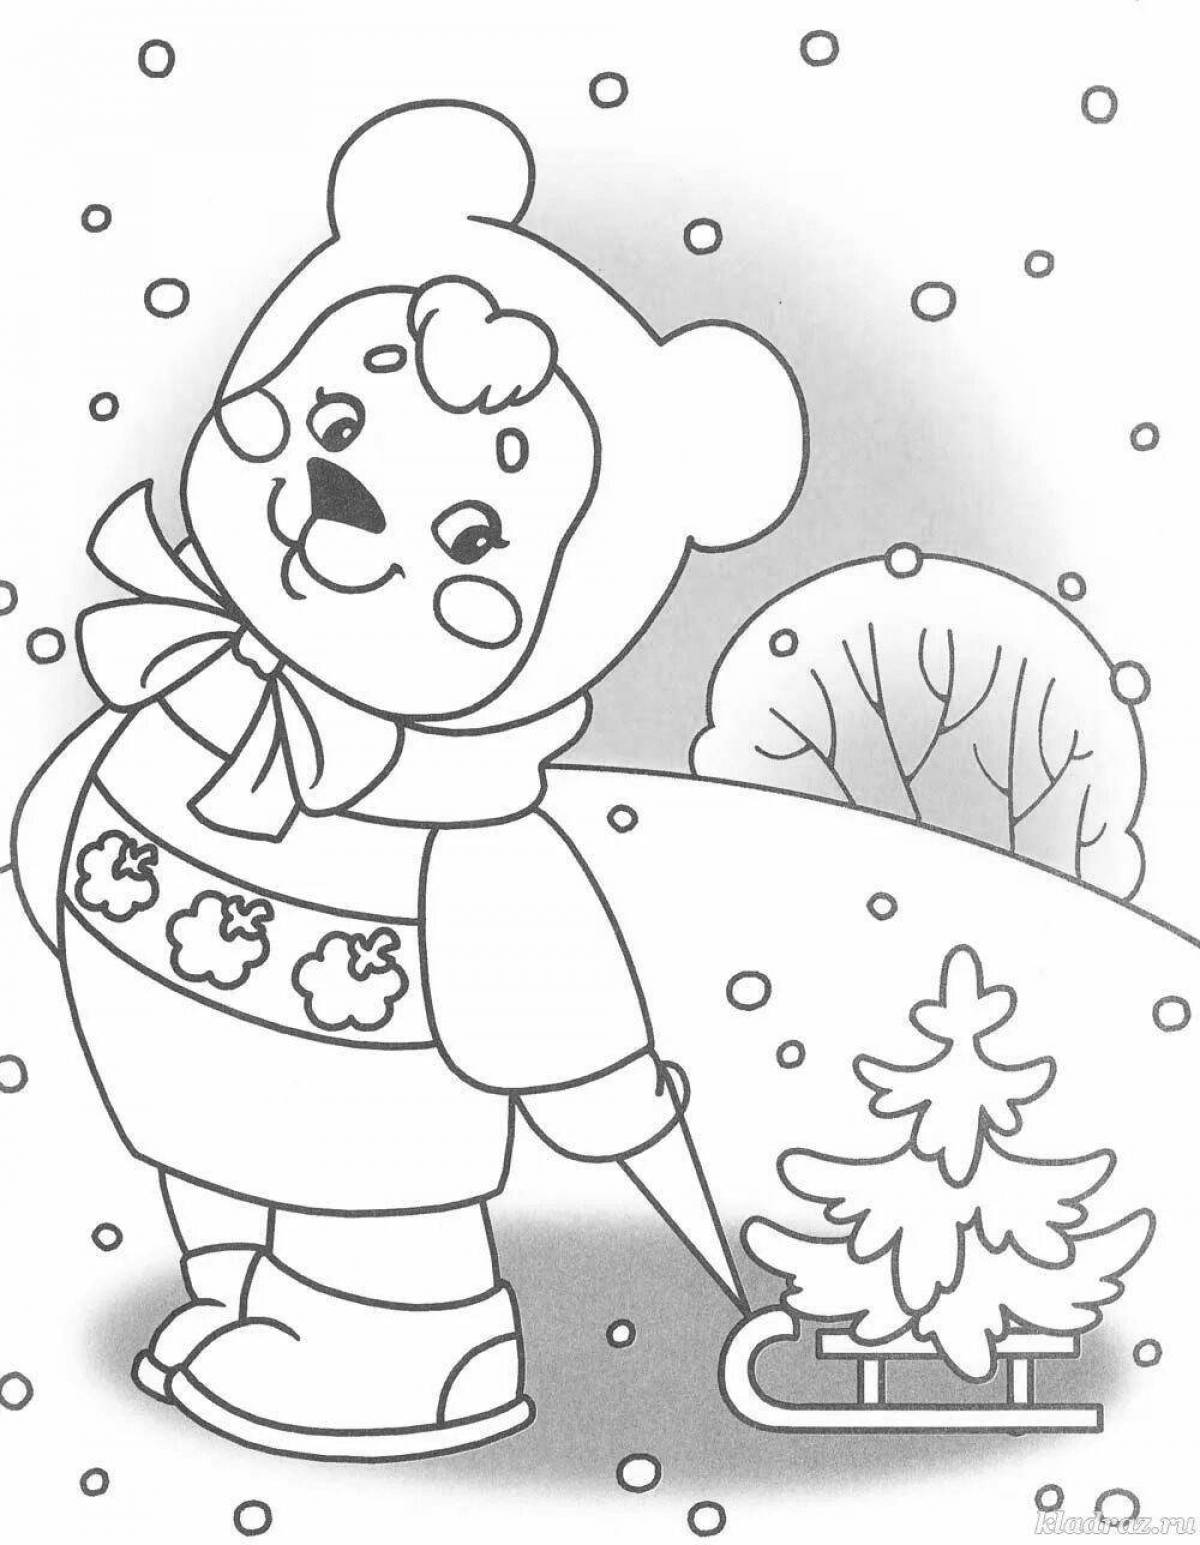 Delightful winter coloring book for children 2-3 years old